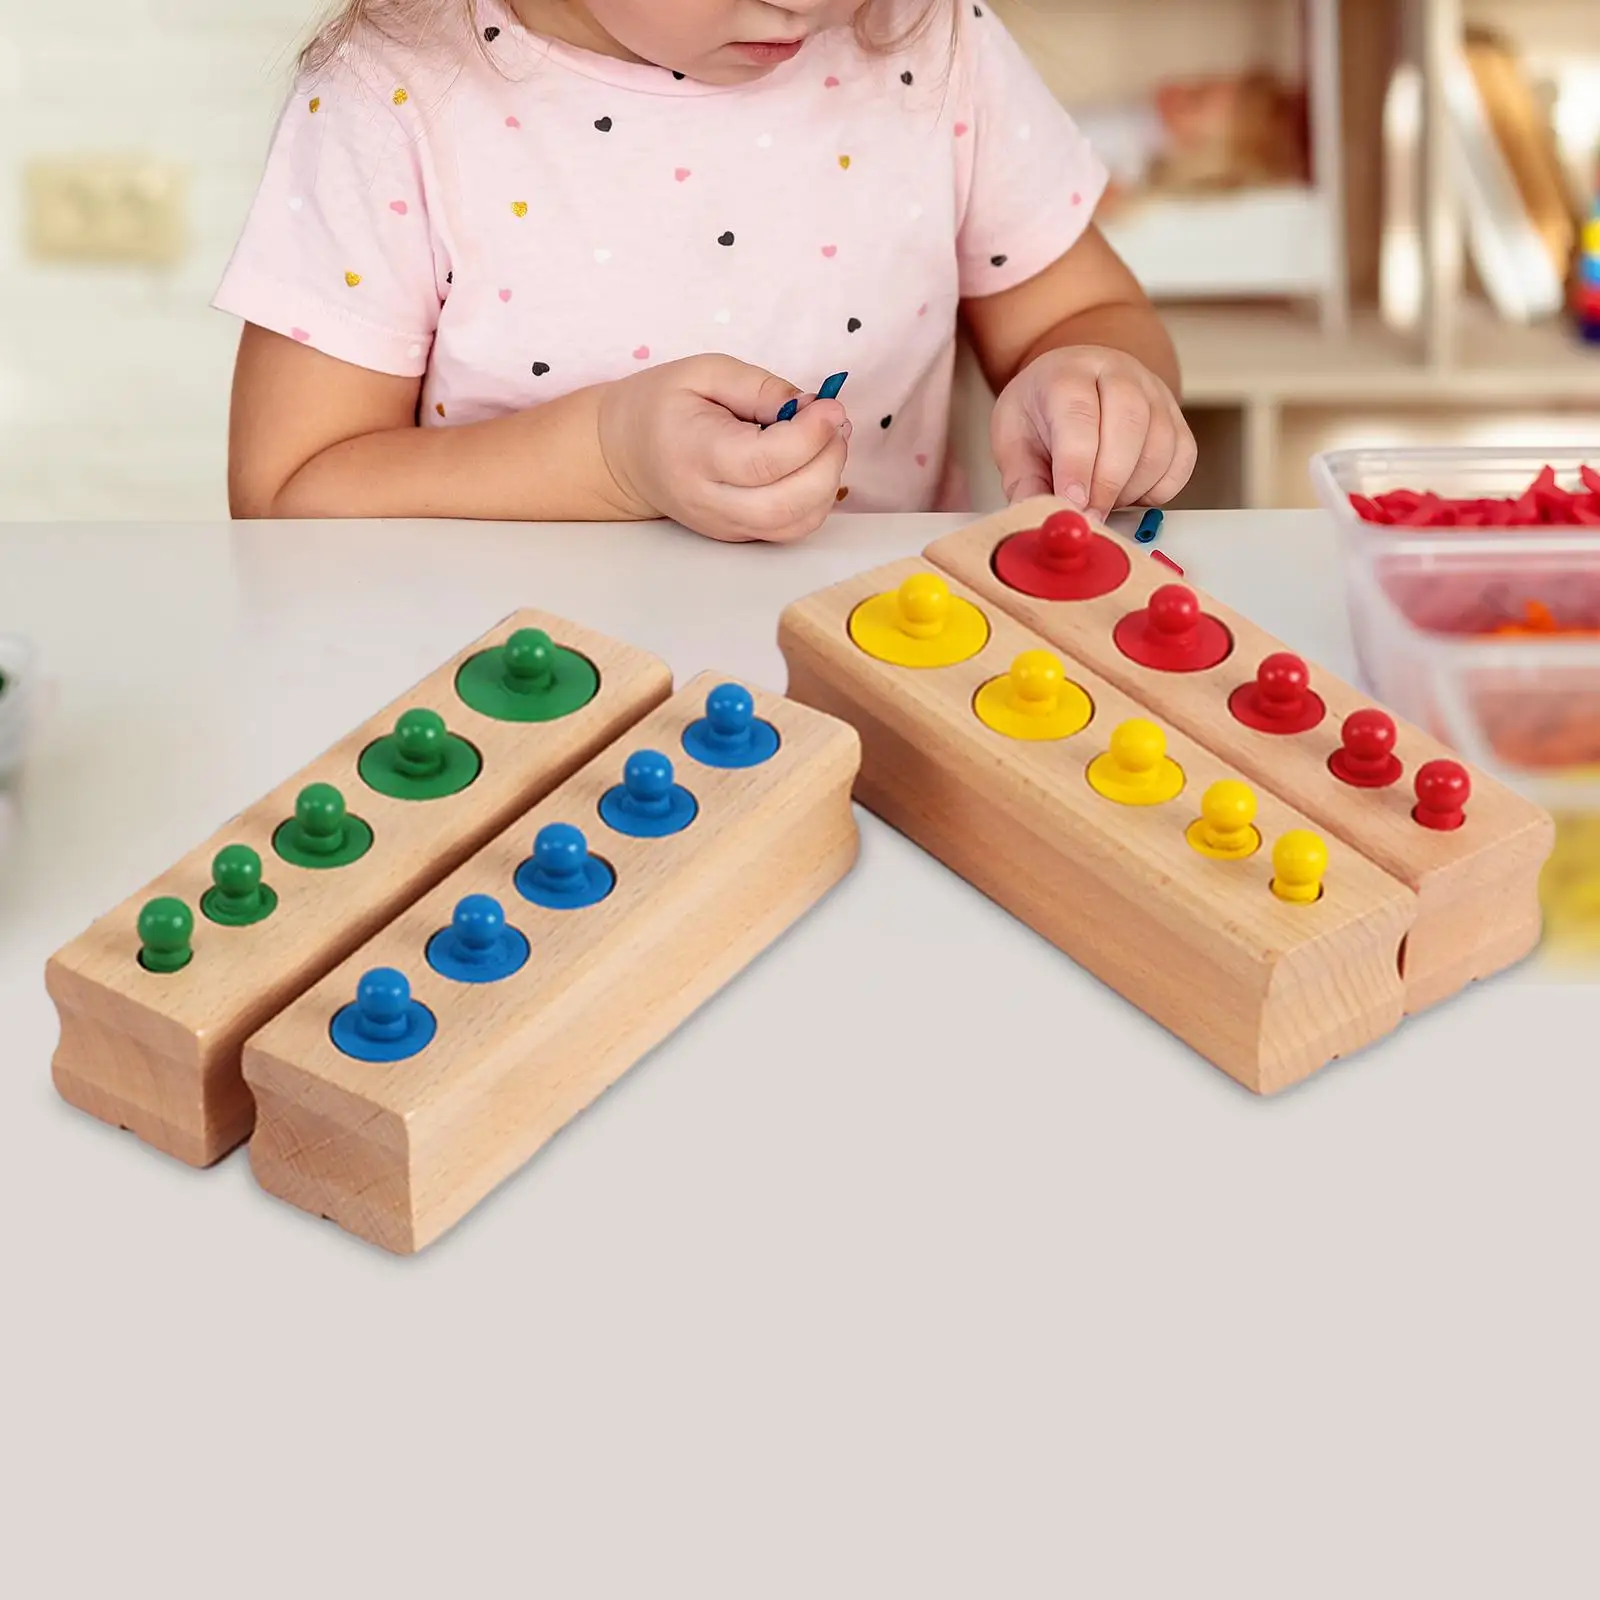 4Pcs Knobbed Cylinders Blocks Socket Colorful Early Development Montessori Toy for Preschool Toys School Home Childern Toddlers